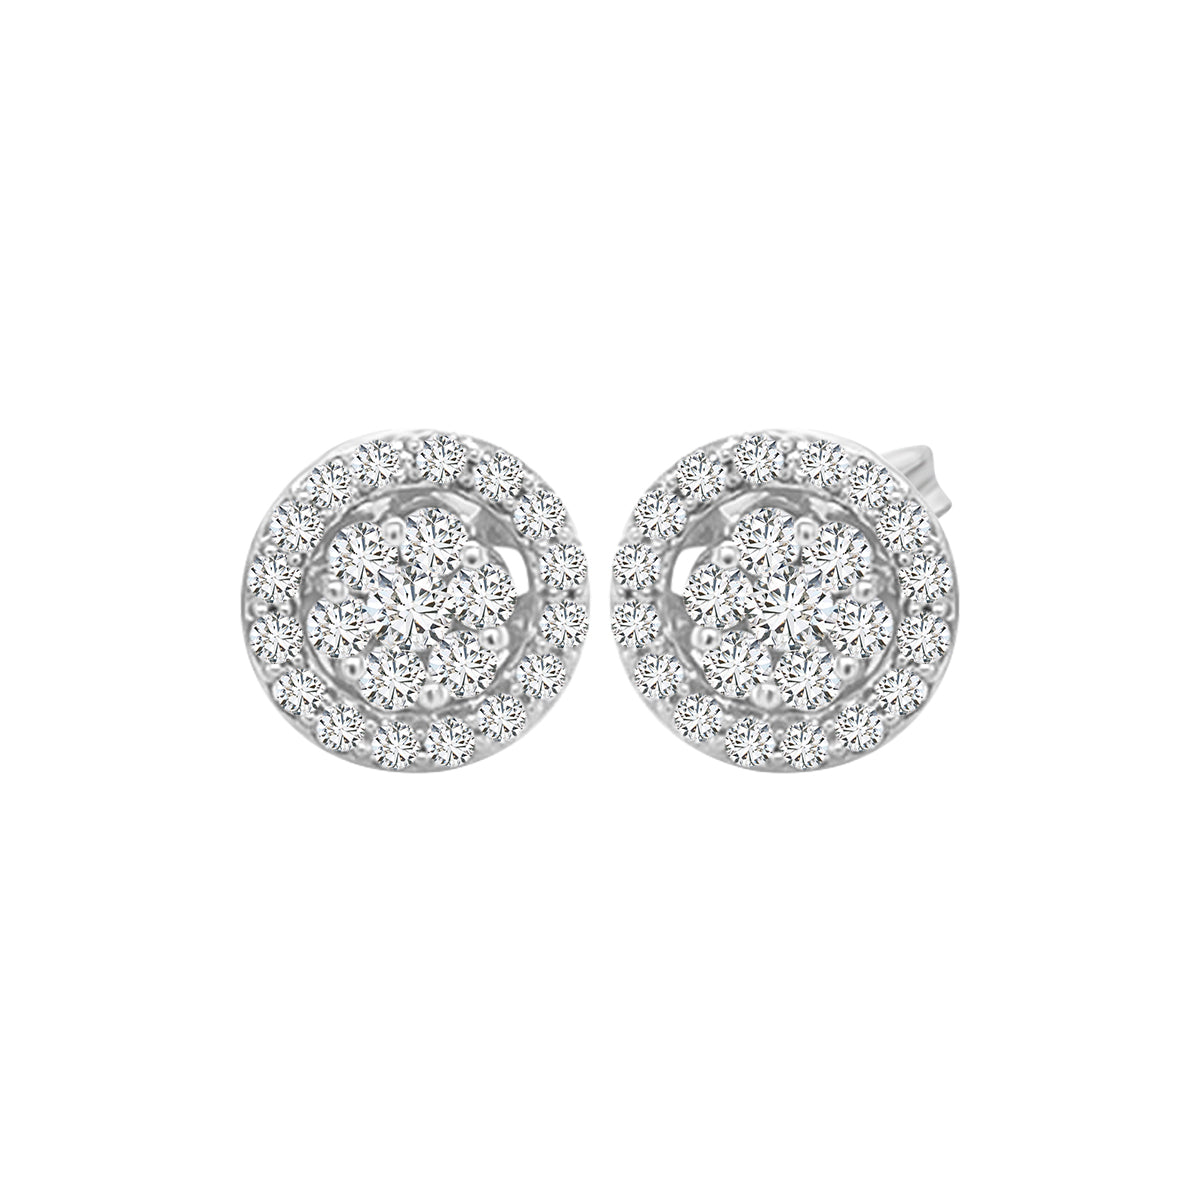 Halo Cluster Diamond Stud Jacket Earrings Crafted In 18K White Gold